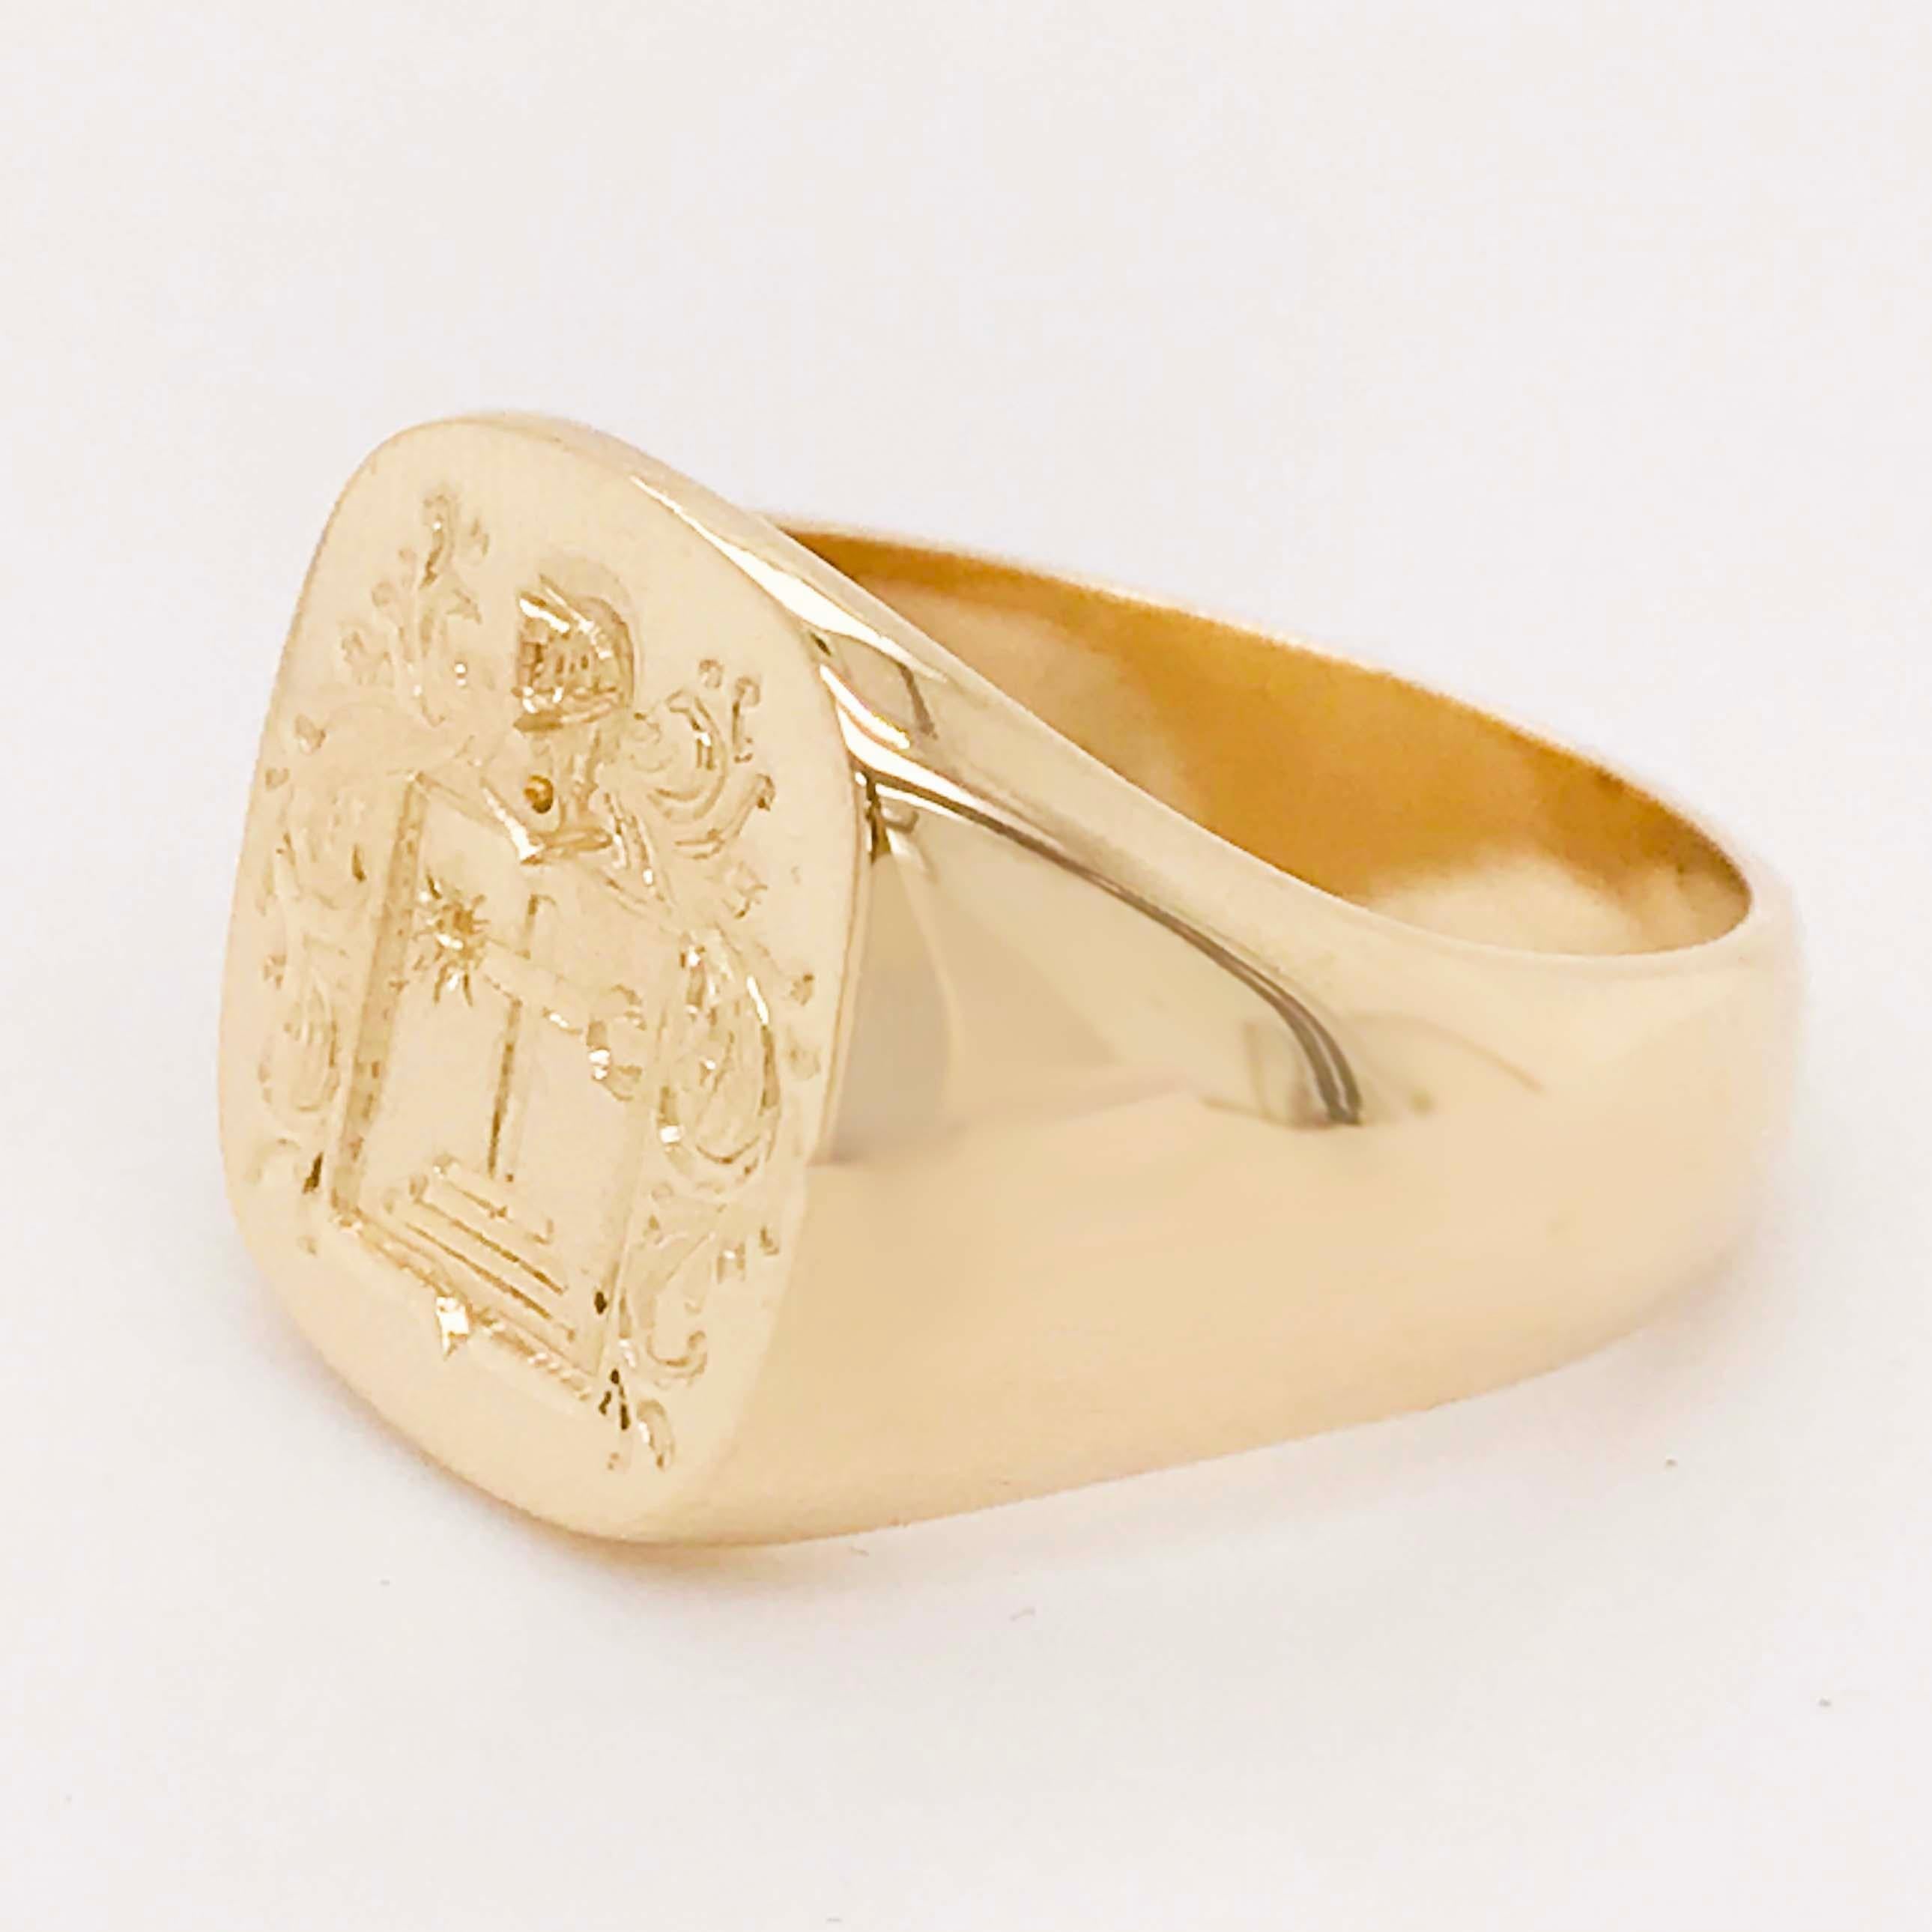 Cross Signet Man's Ring in 14K Yellow Gold, Religious Coat of Arms Ring 1